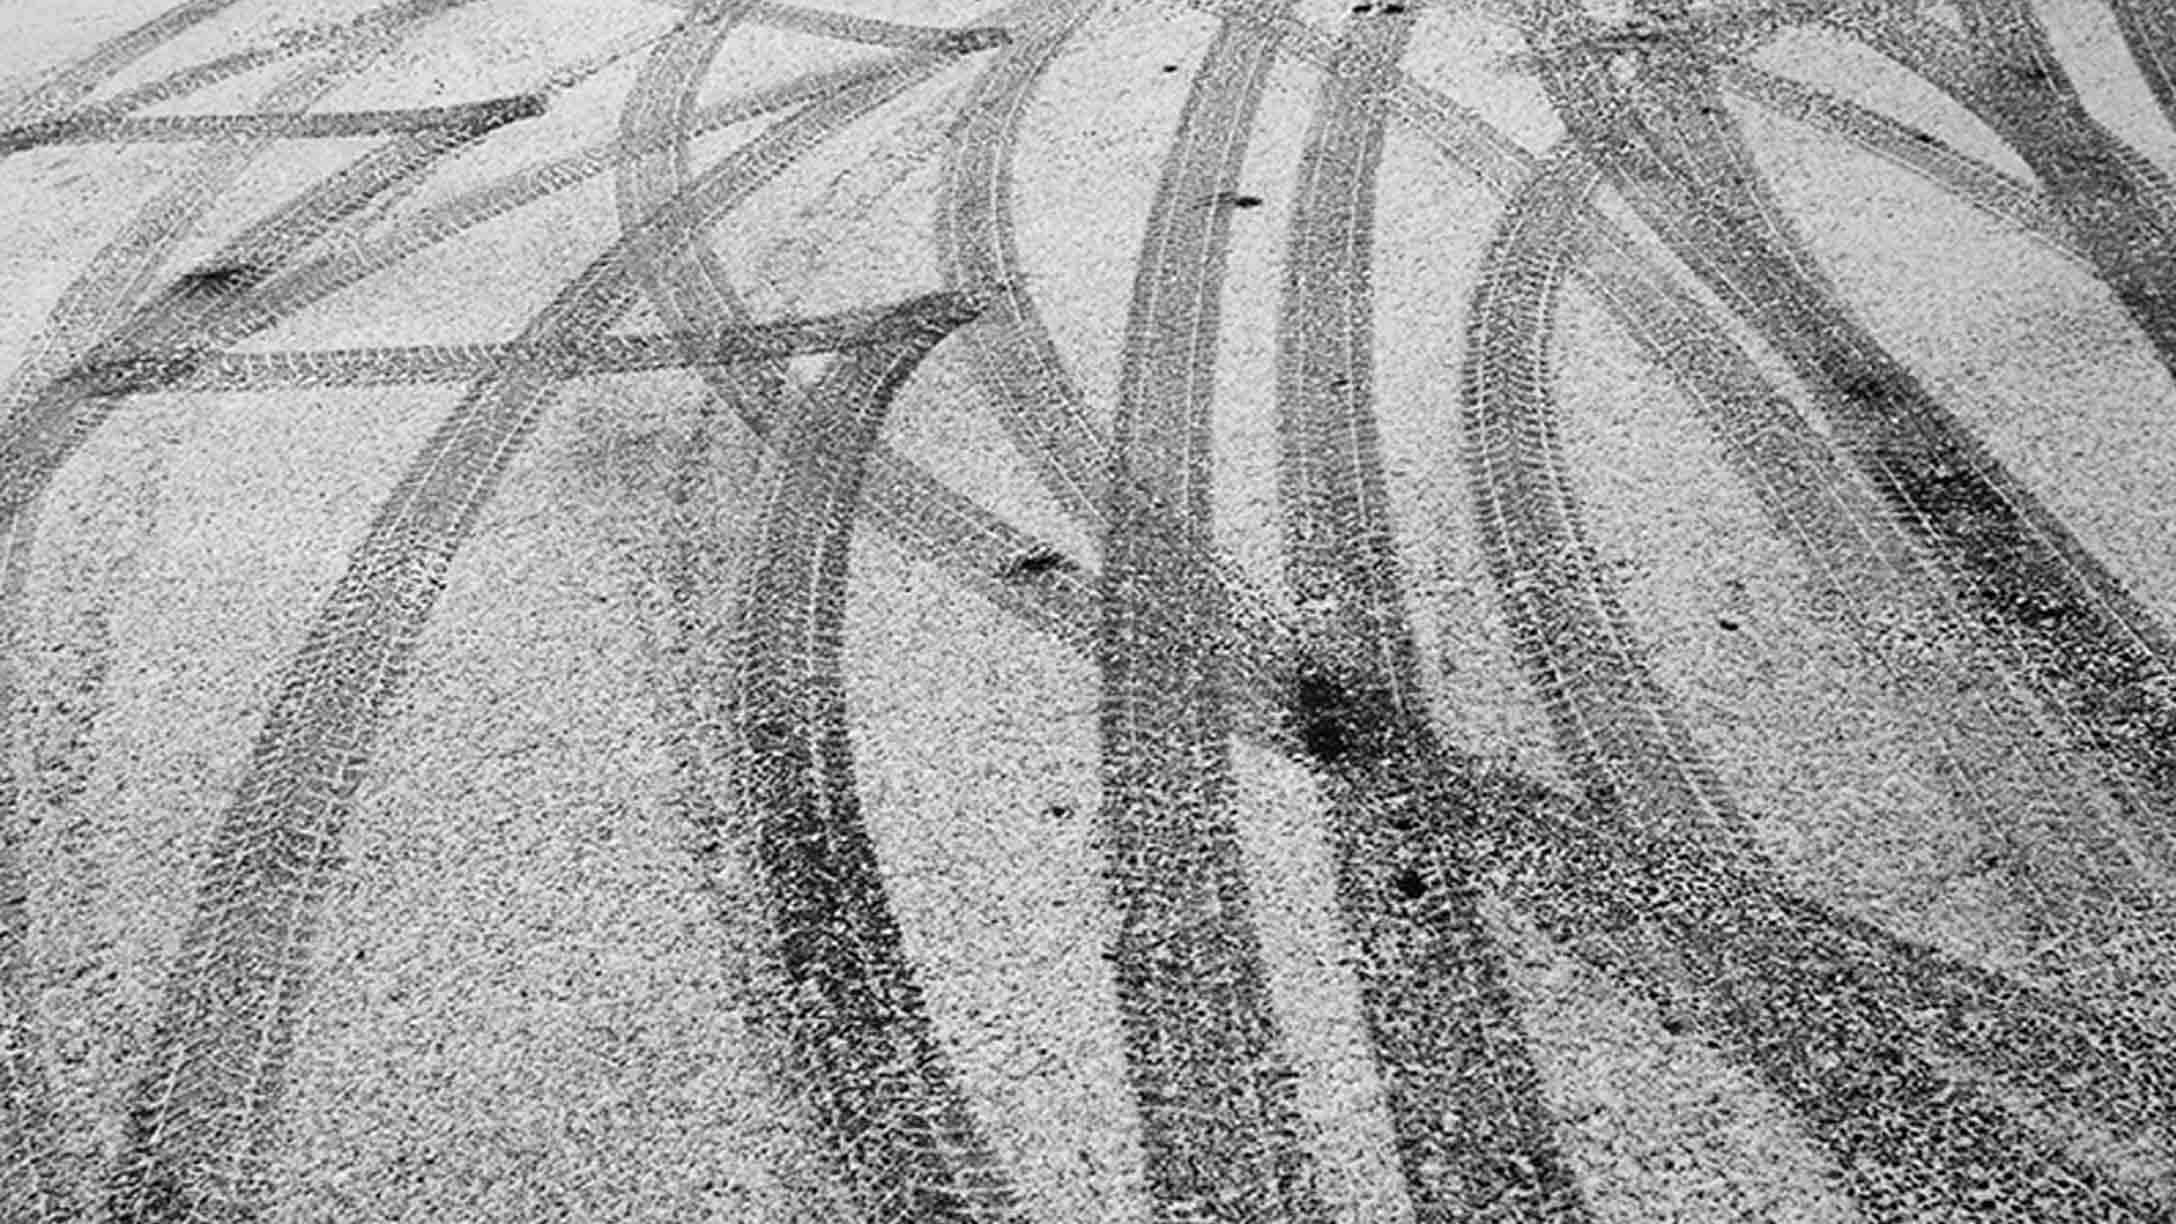 Tire tracks on road in snow